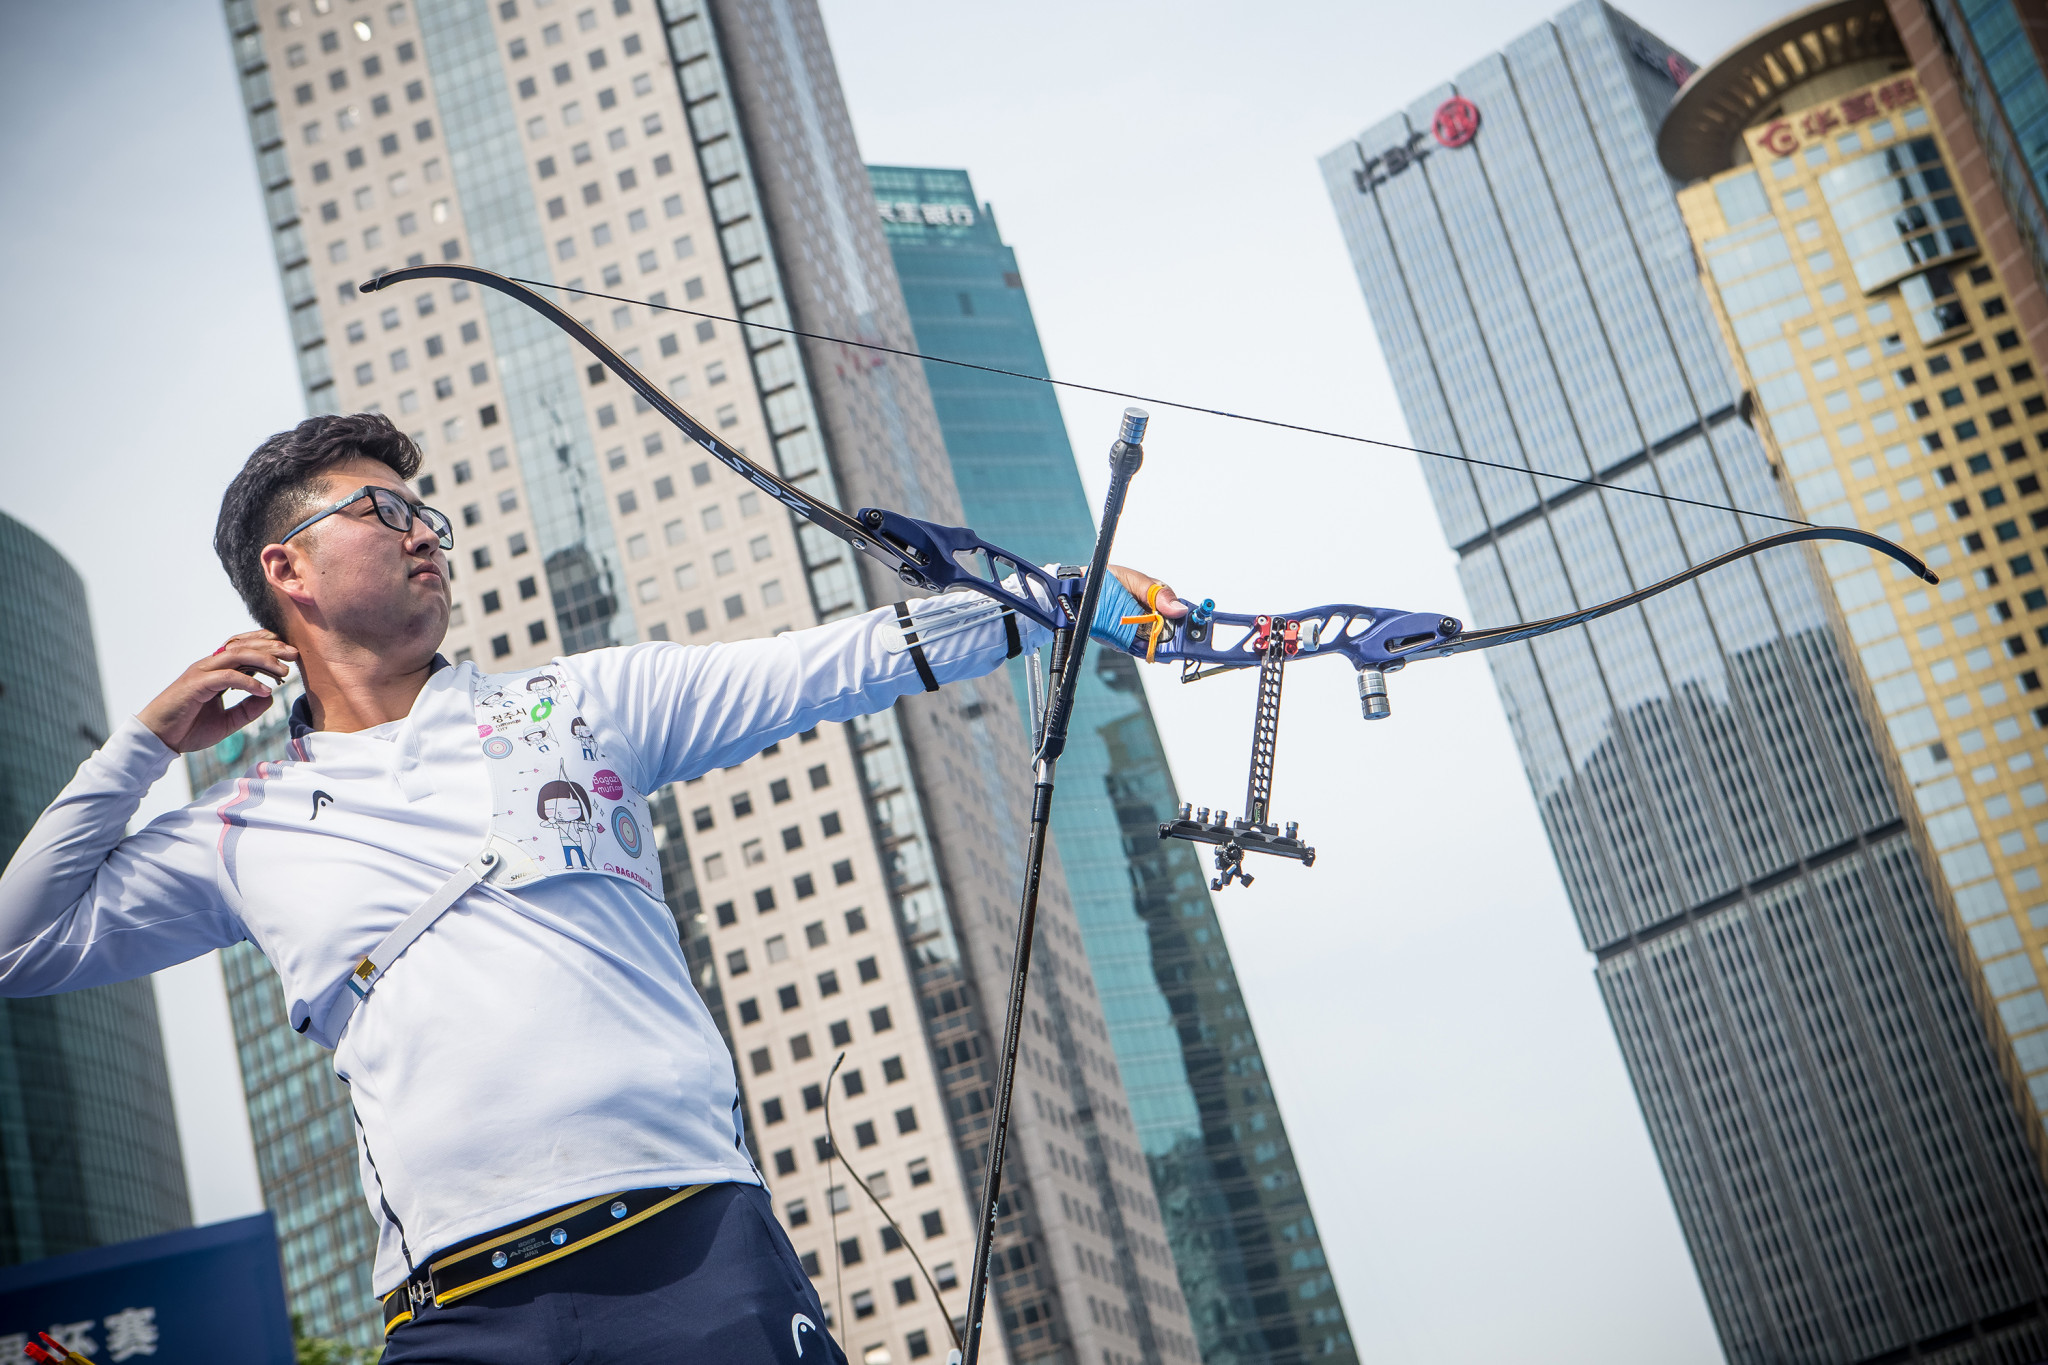 Shanghai will be host to the second stage of the 2020 Archery World Cup ©Getty Images